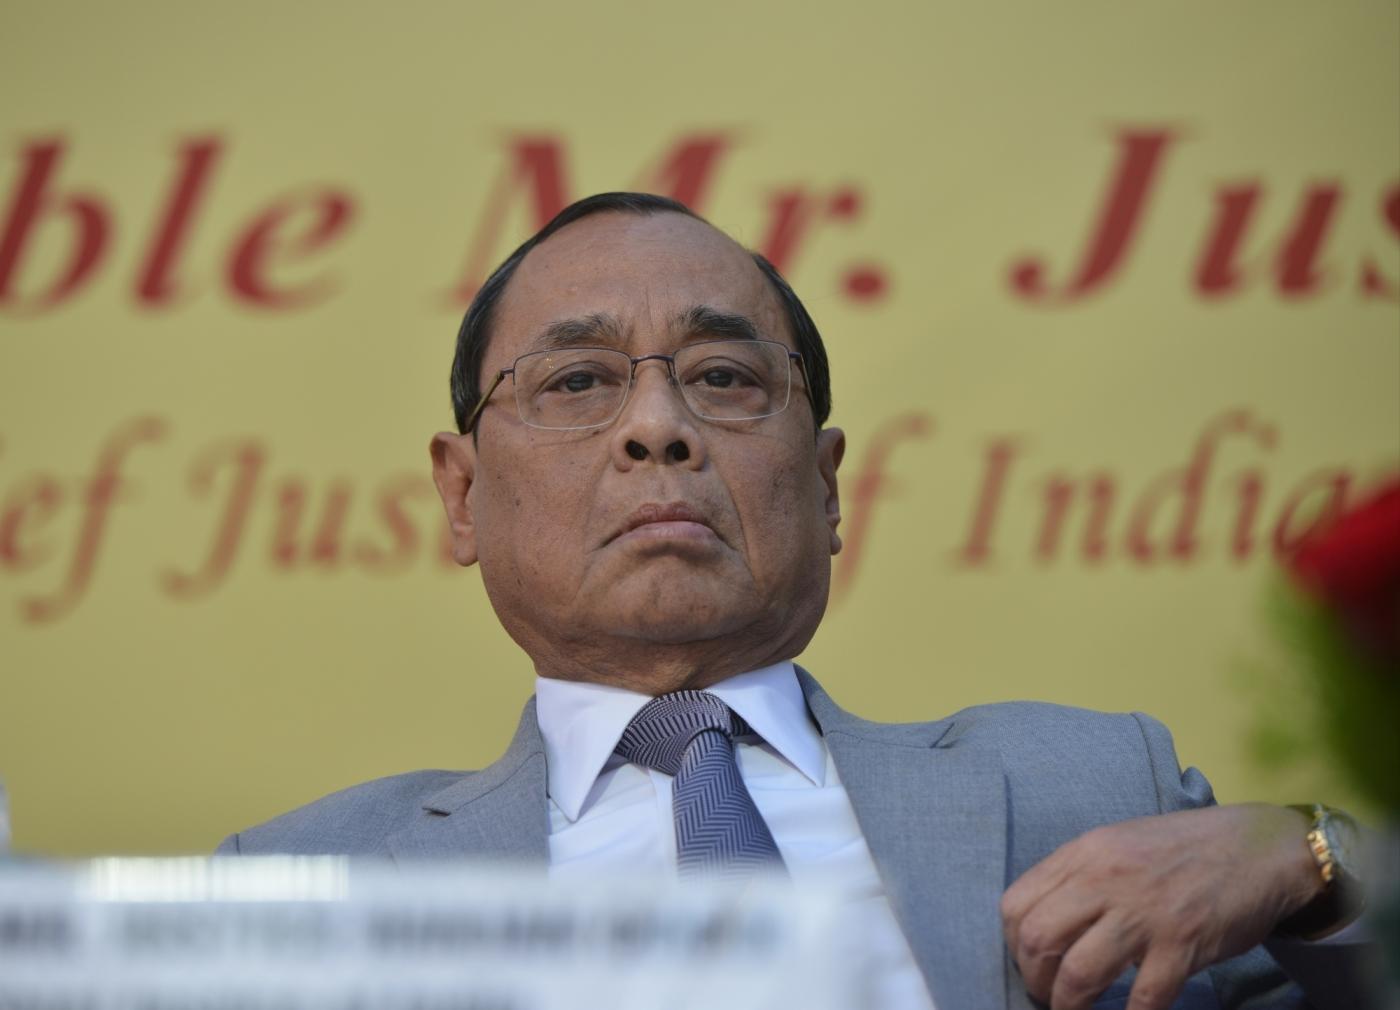 New Delhi: Chief Justice of India Ranjan Gogoi during the farewell ceremony of Justice A.K. Sikri in New Delhi, on March 6, 2019. (Photo: IANS) by . 